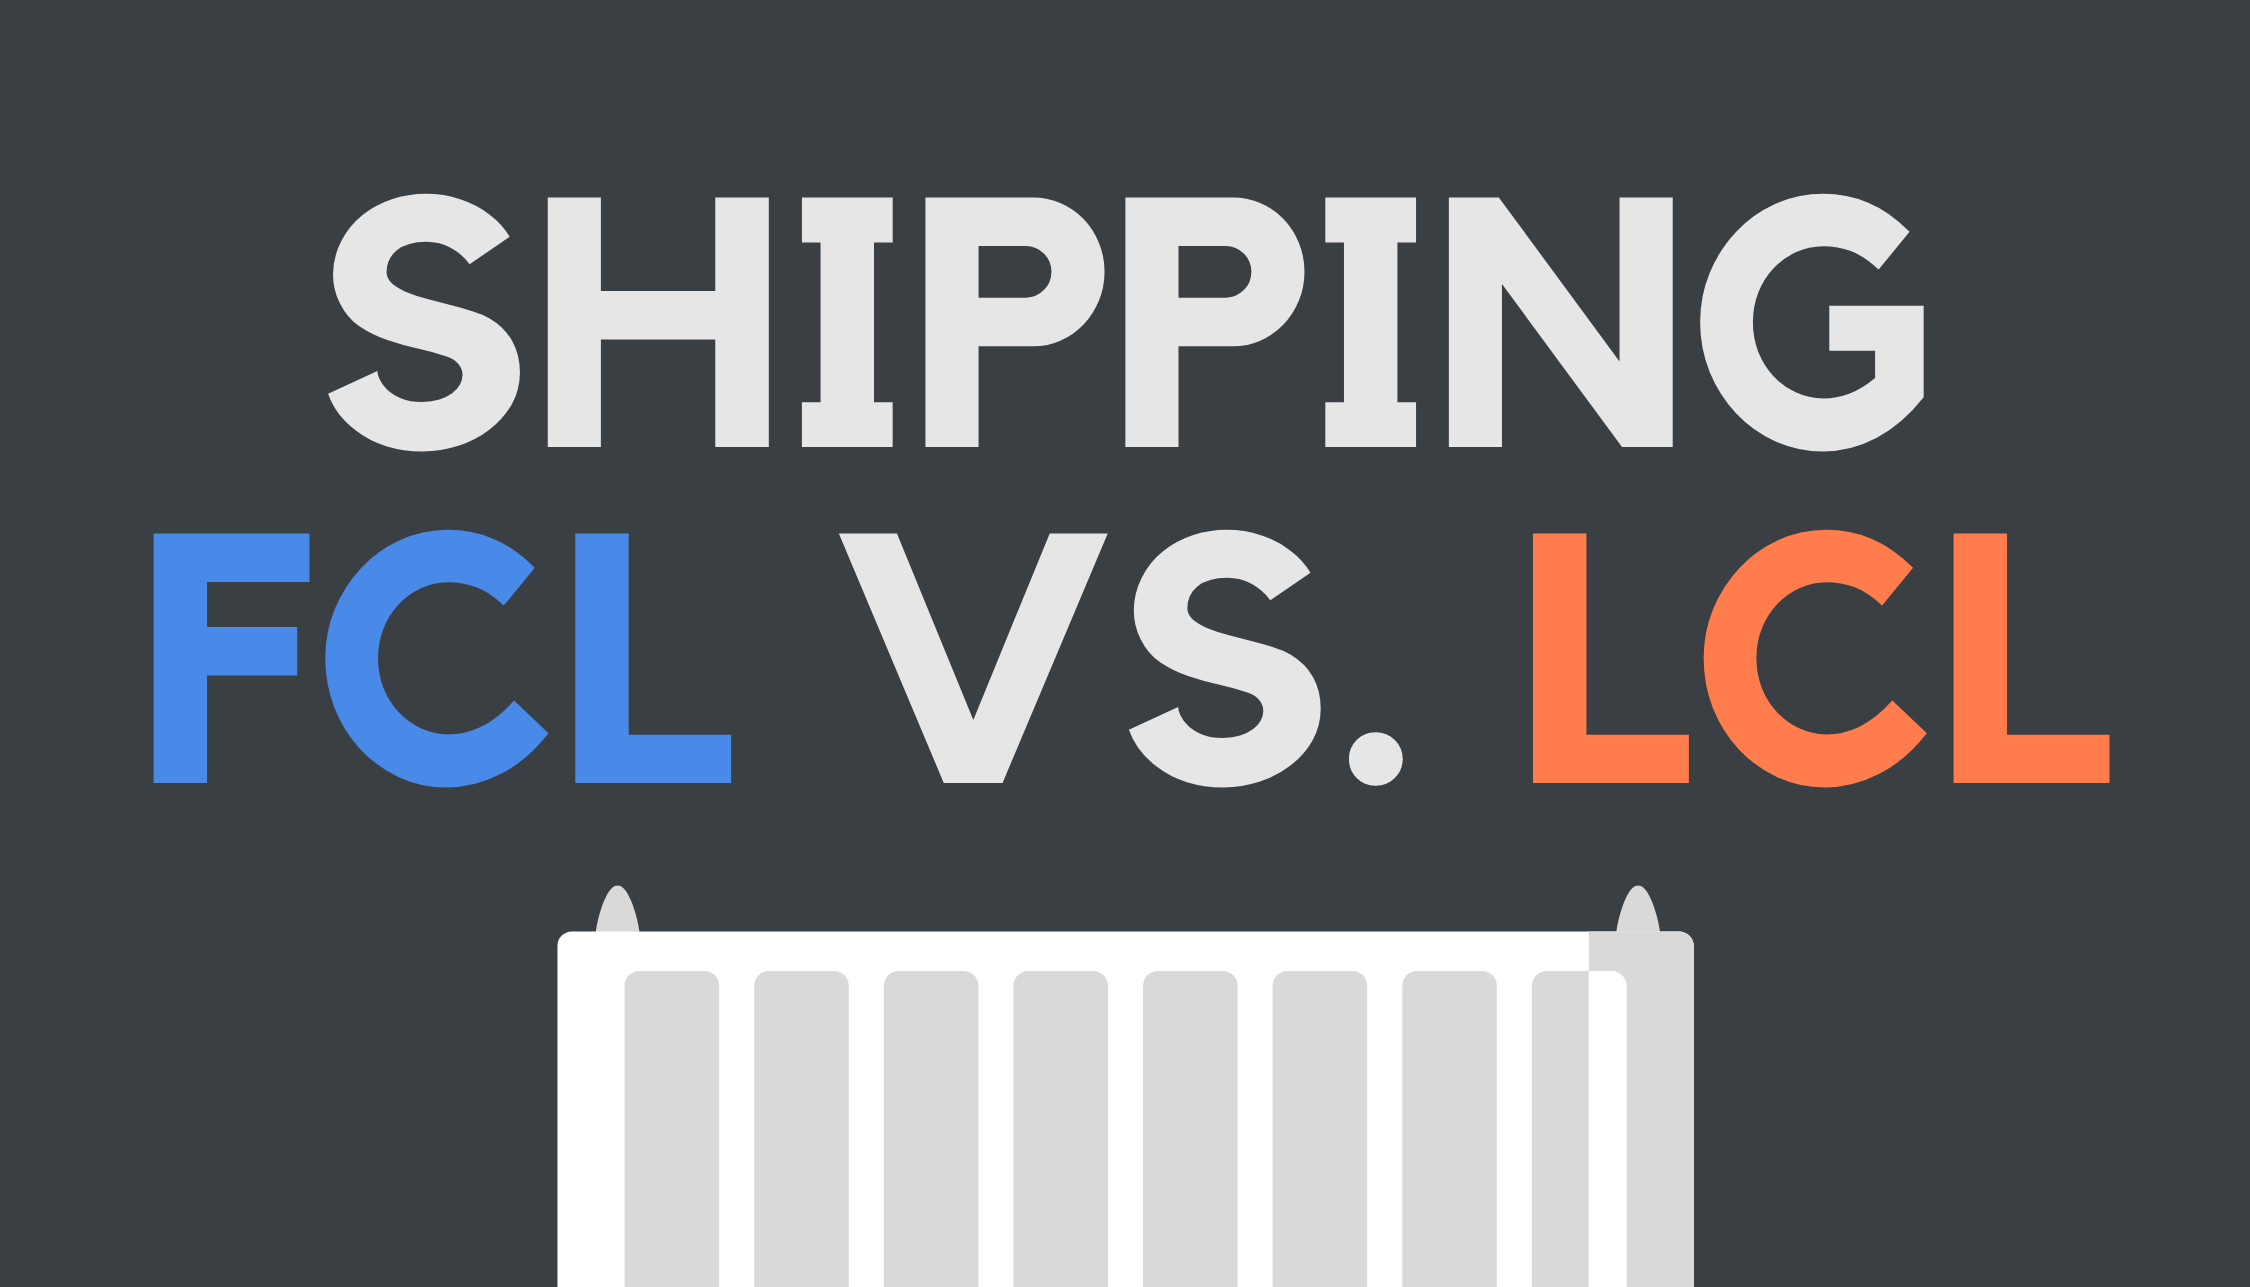 Shipping FCL vs. LCL